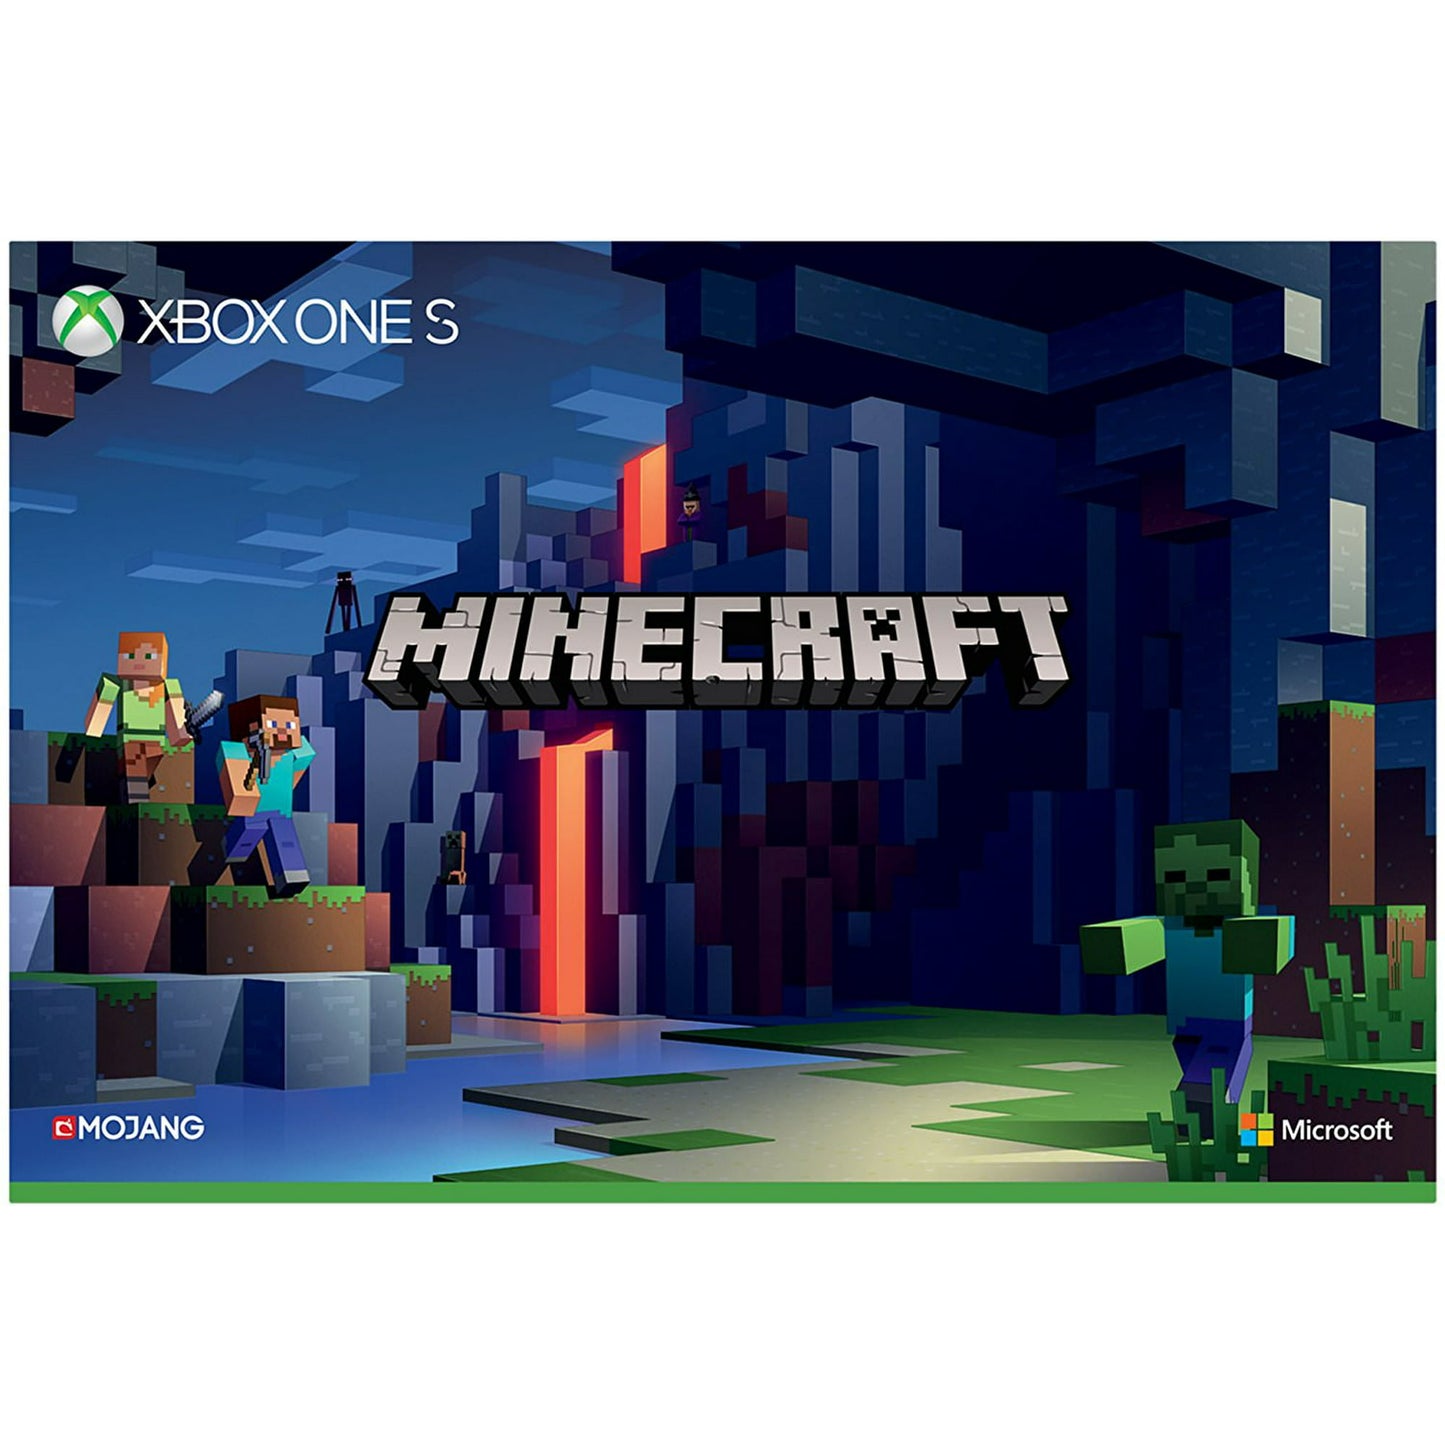 Microsoft 23C-00001 Xbox One S Minecraft Limited Edition 1TB Gaming Console with 2 Controller Included BOLT AXTION Bundle Like New